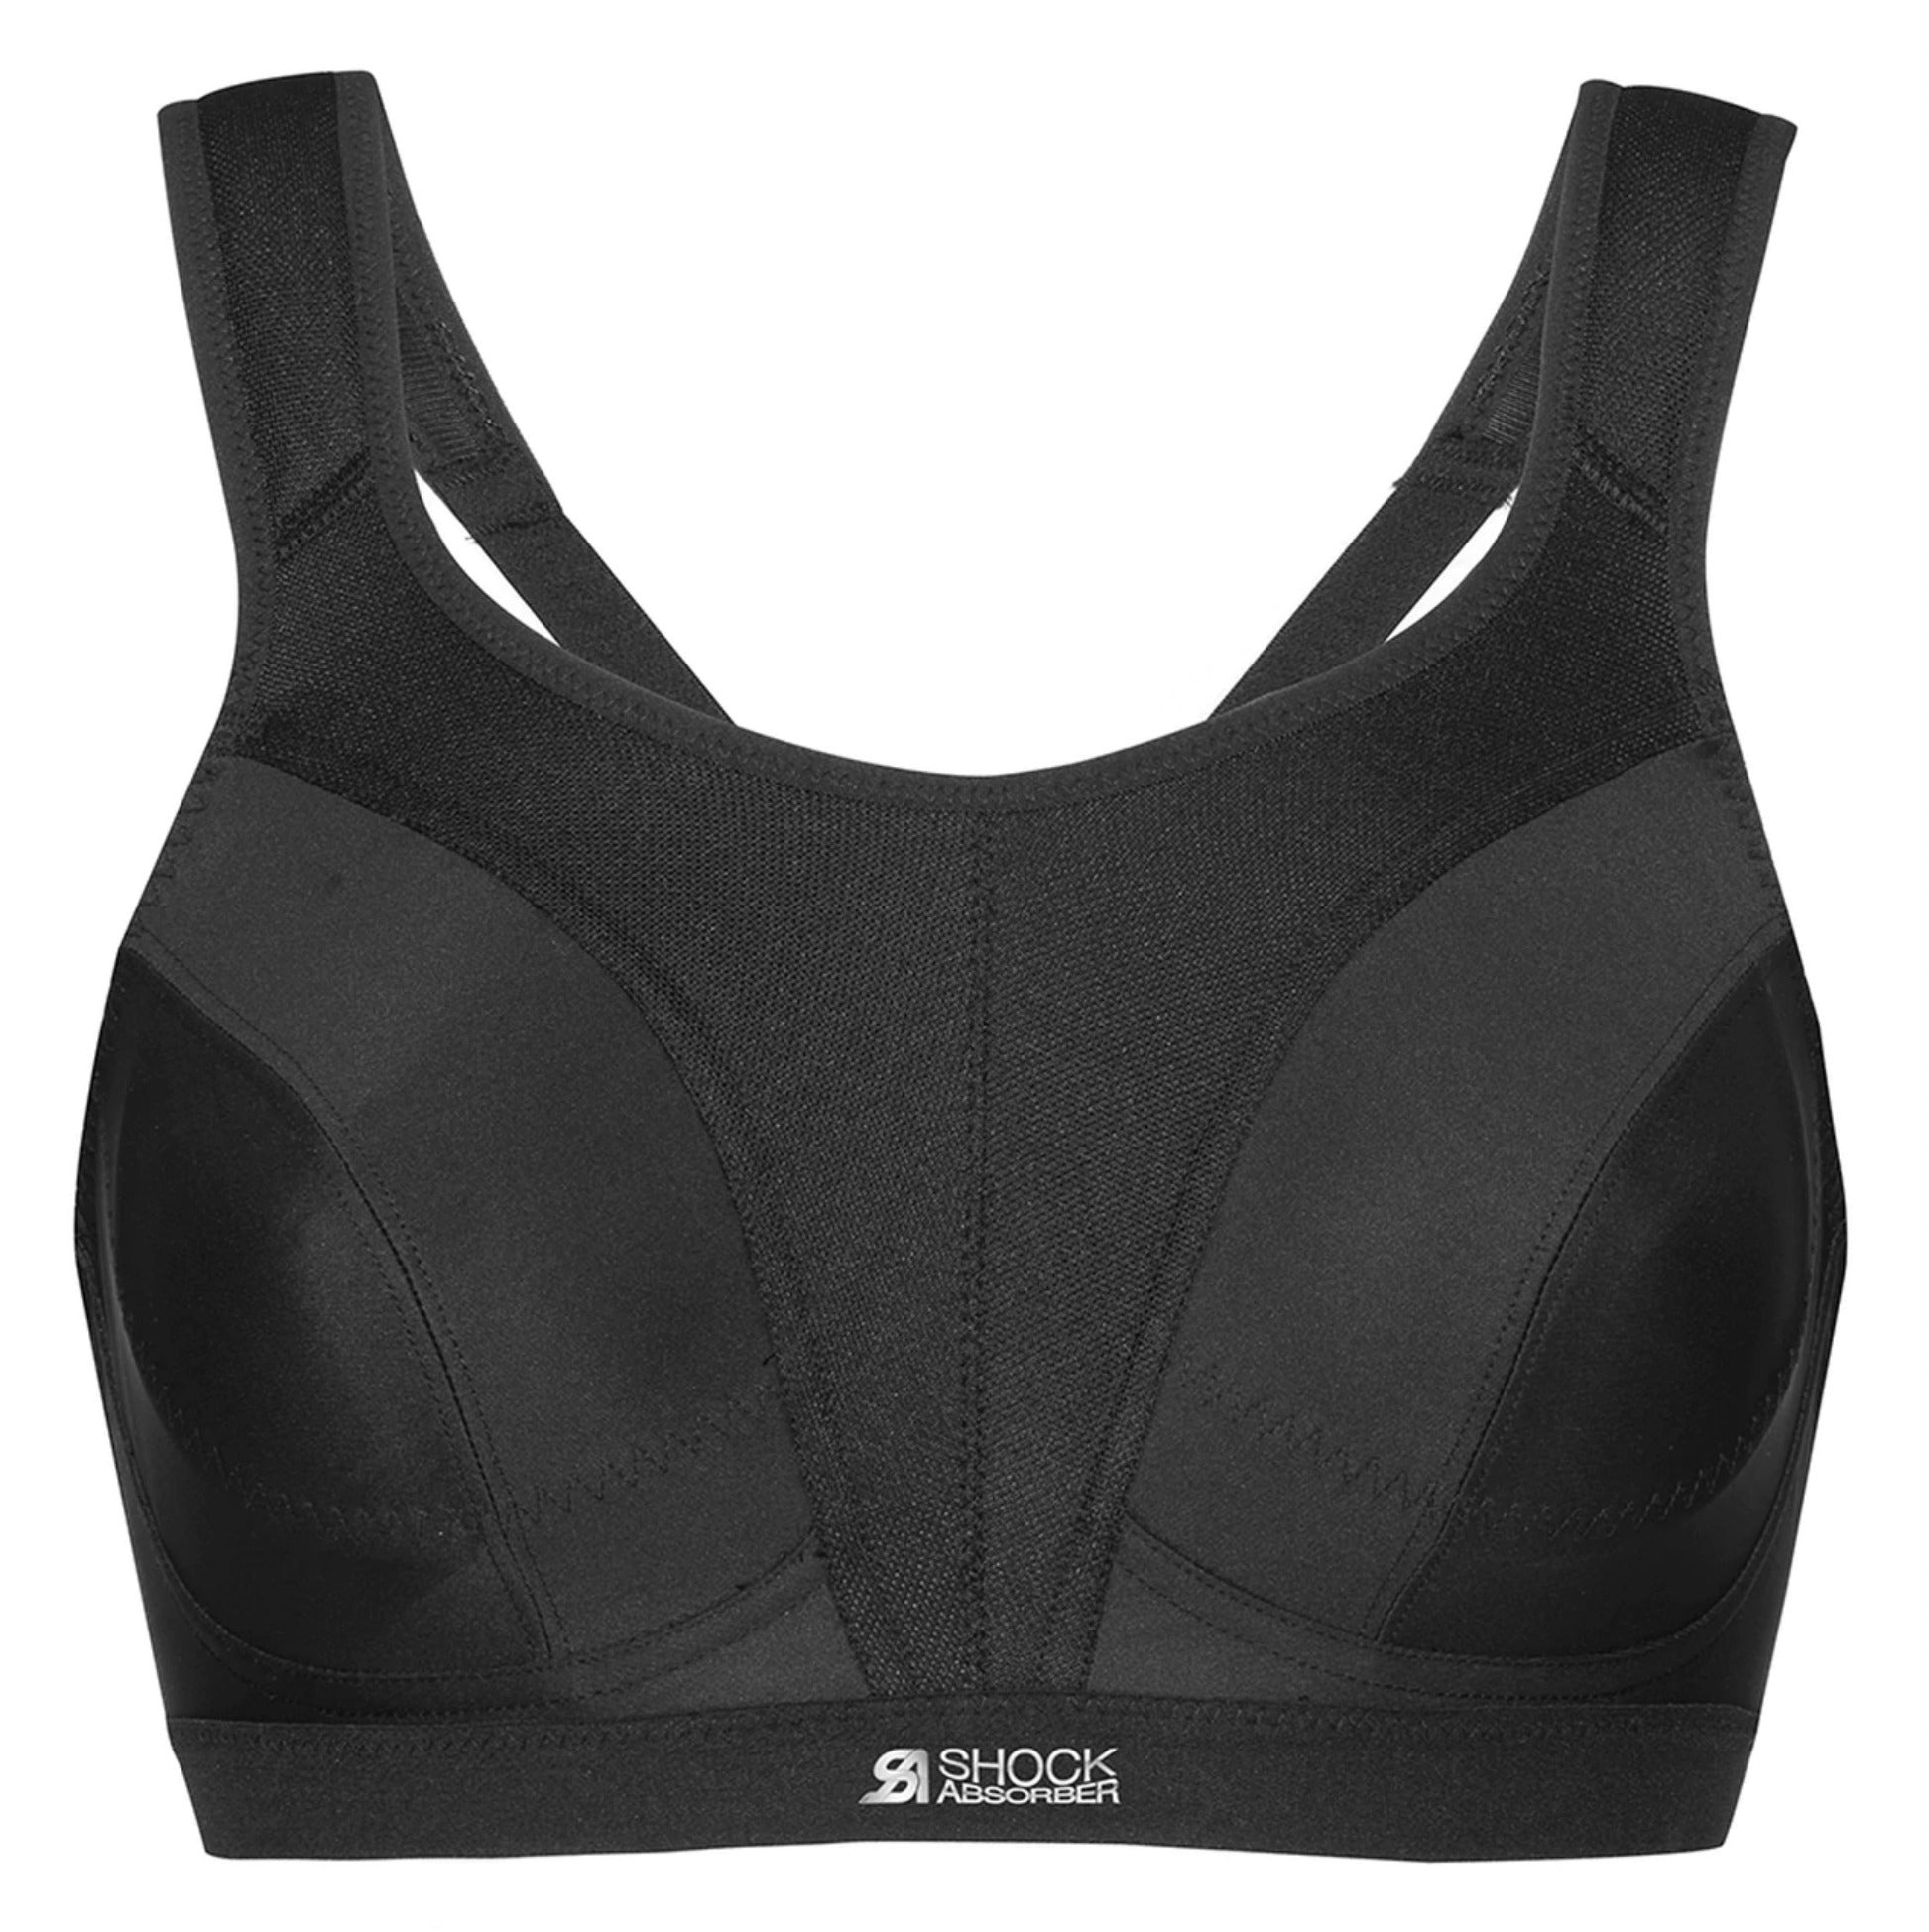 NEW Shock Absorber Active D+ Classic Support Bra SN109 size 30D